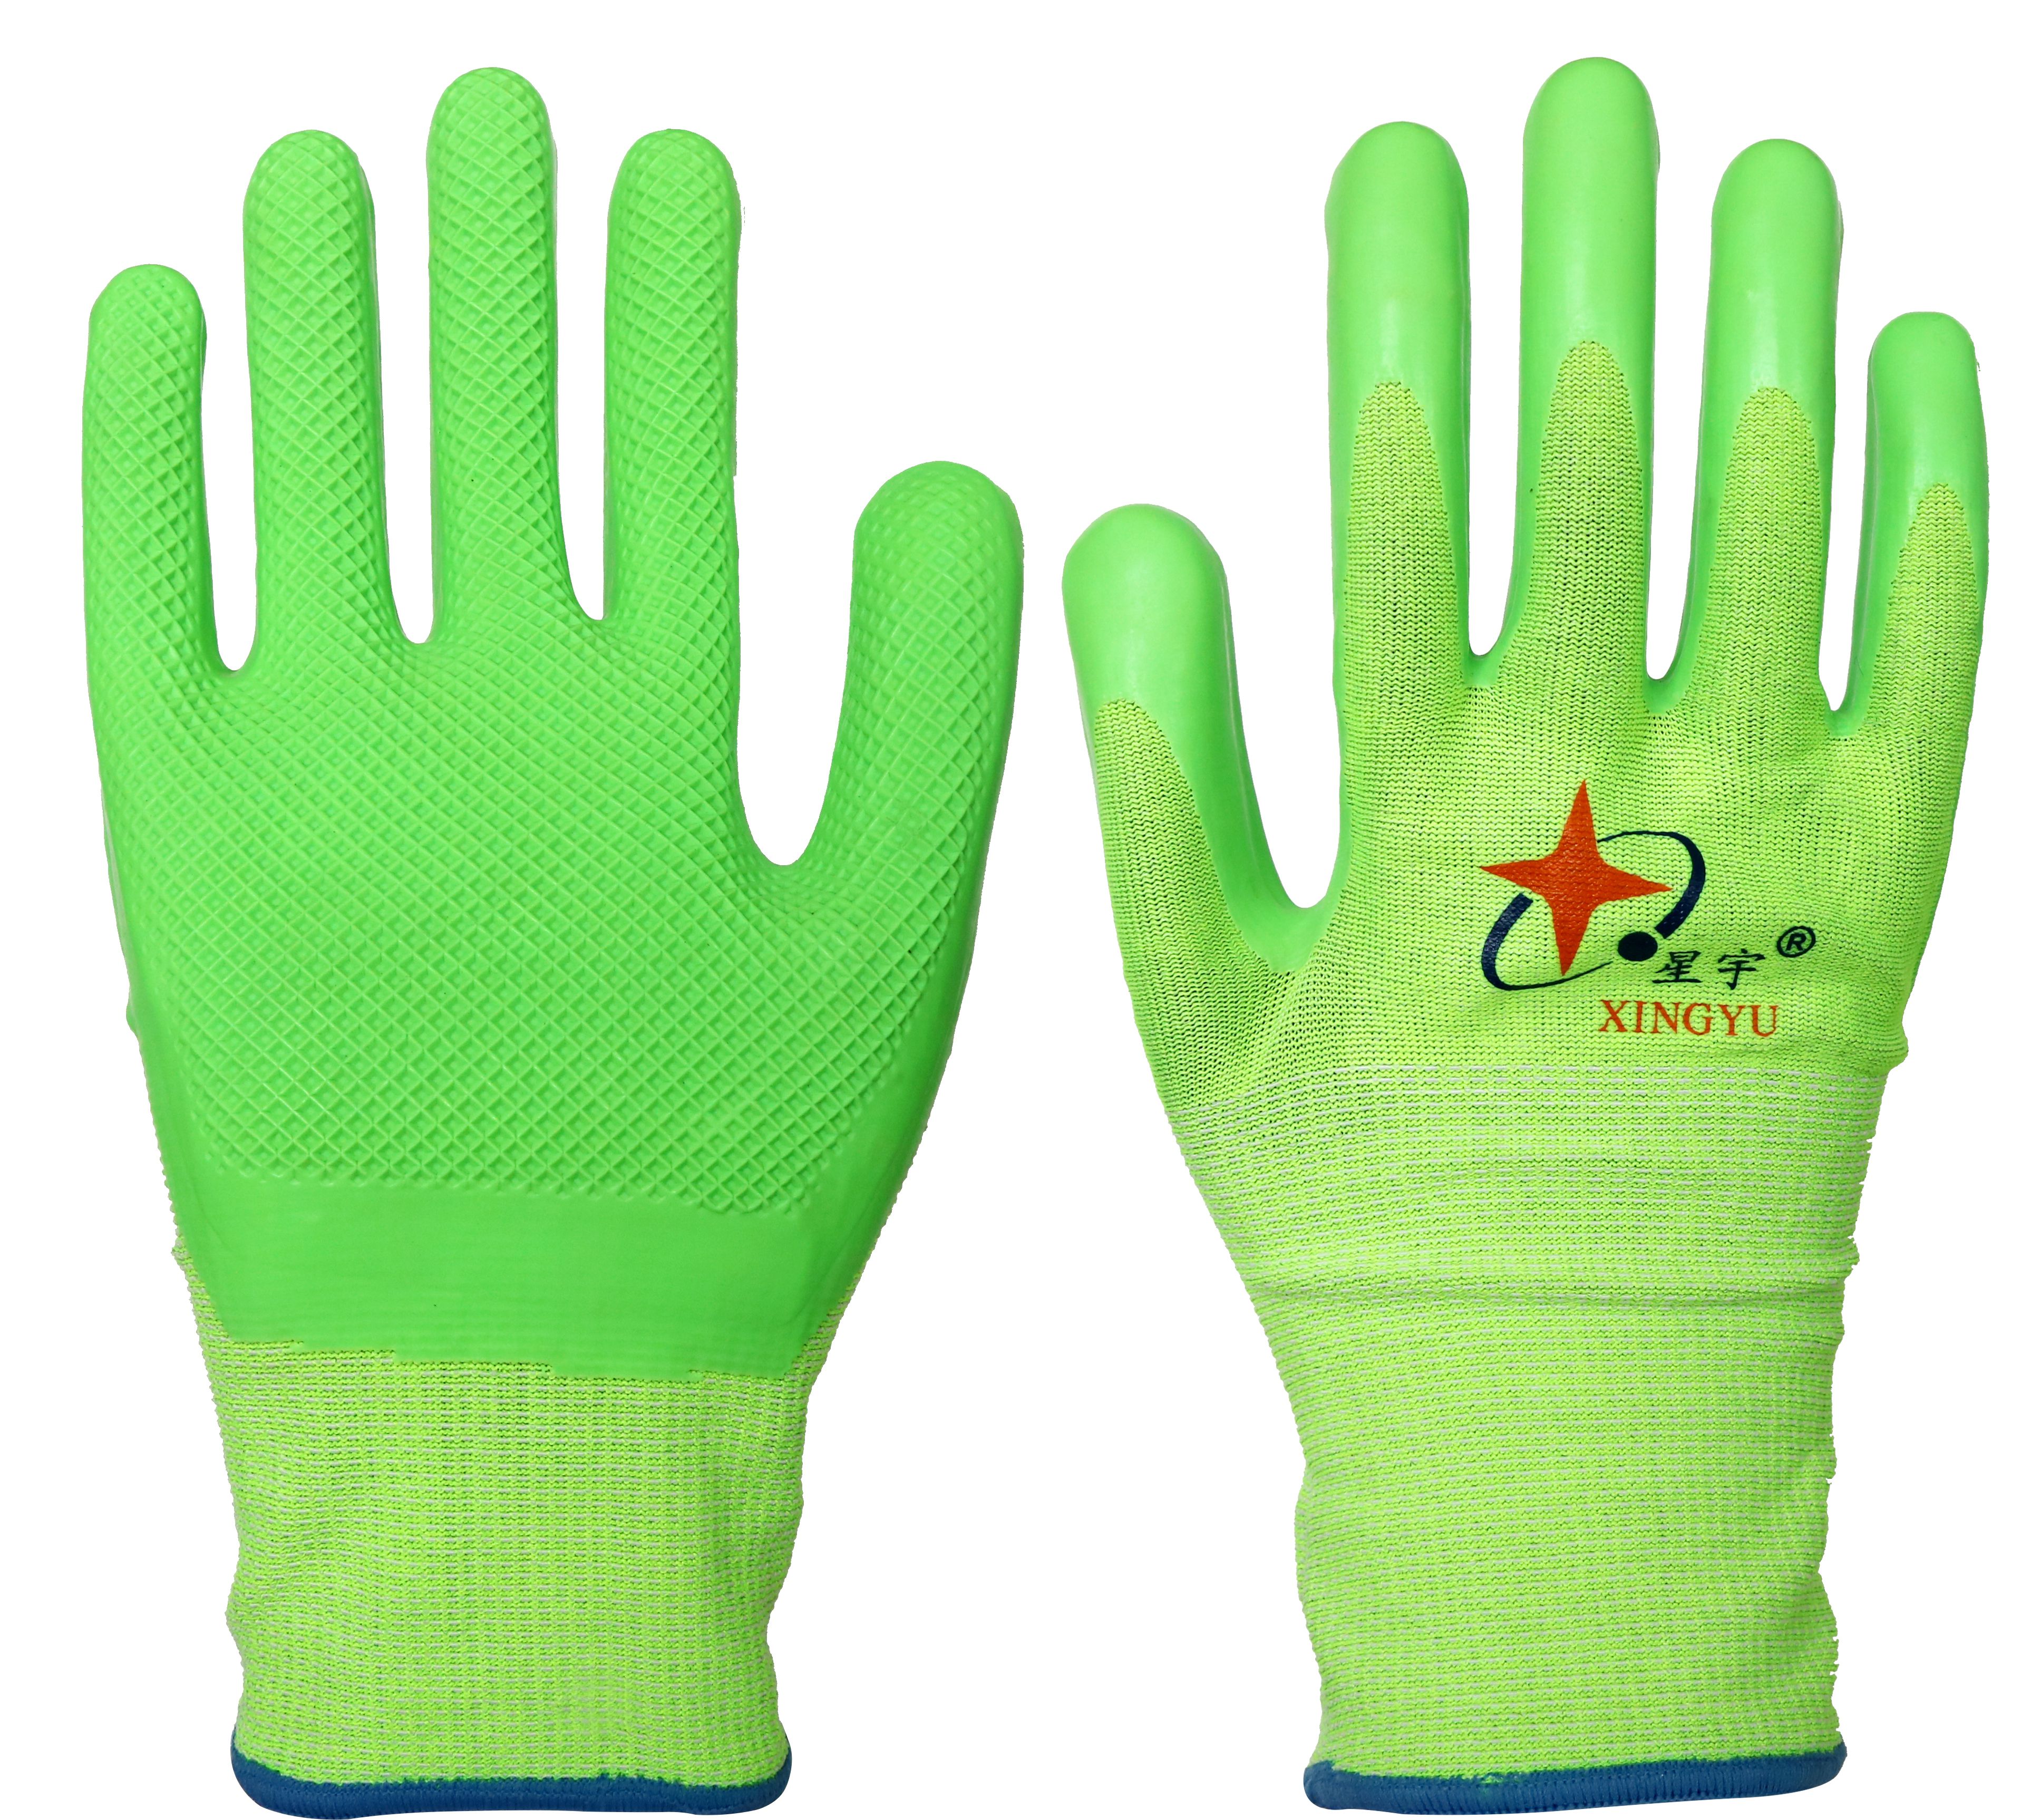 18 gauge HPPE Adamas Technology with ECO-Latex coated gloves